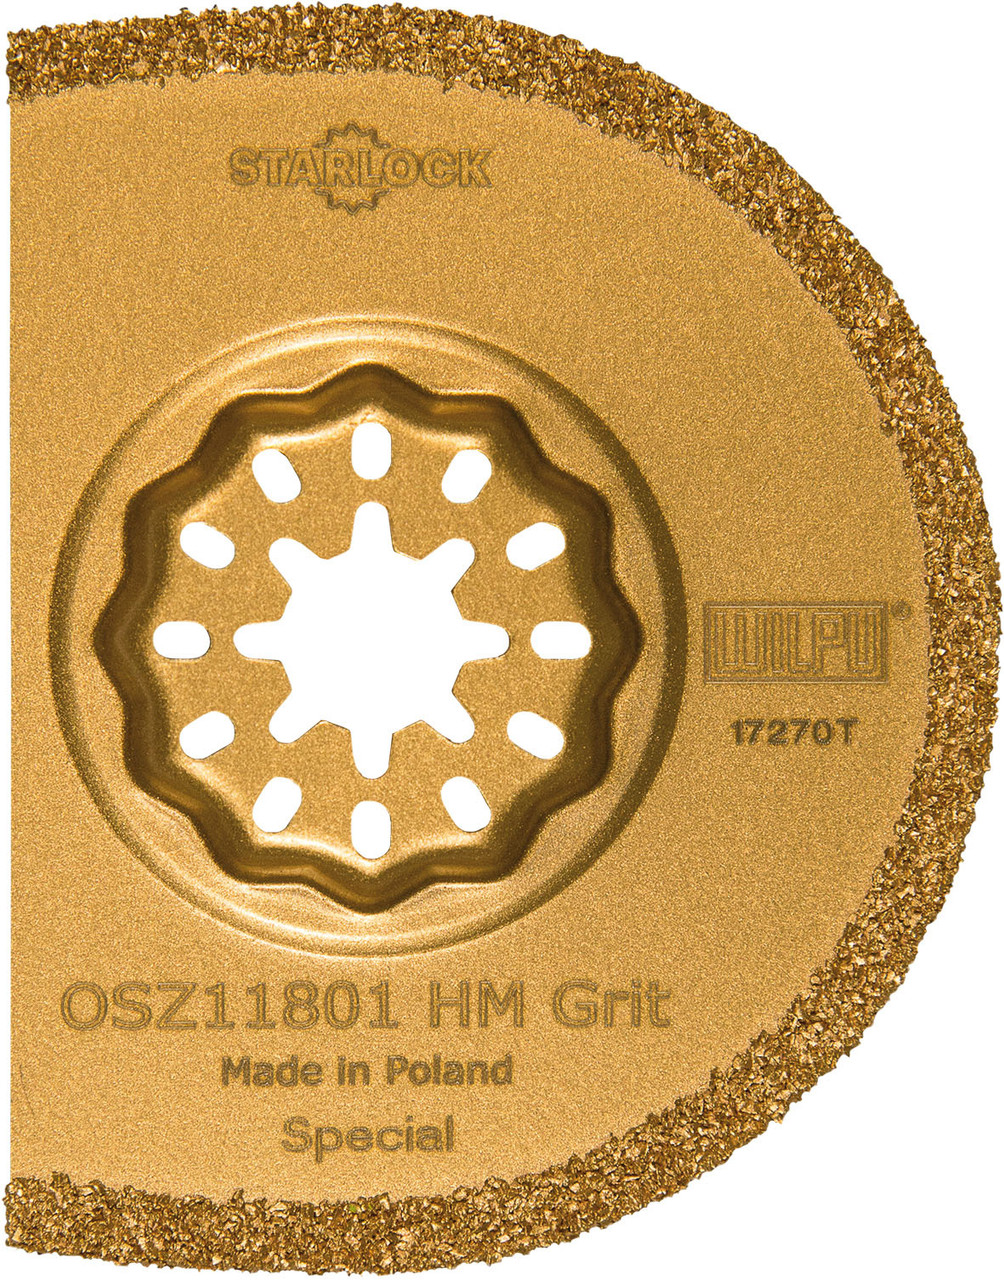 WILPU Multi Tool Blade for Tile, Stone and Wood, the OSZ 118 Saw Blade is for Carbide Rasp for Construction